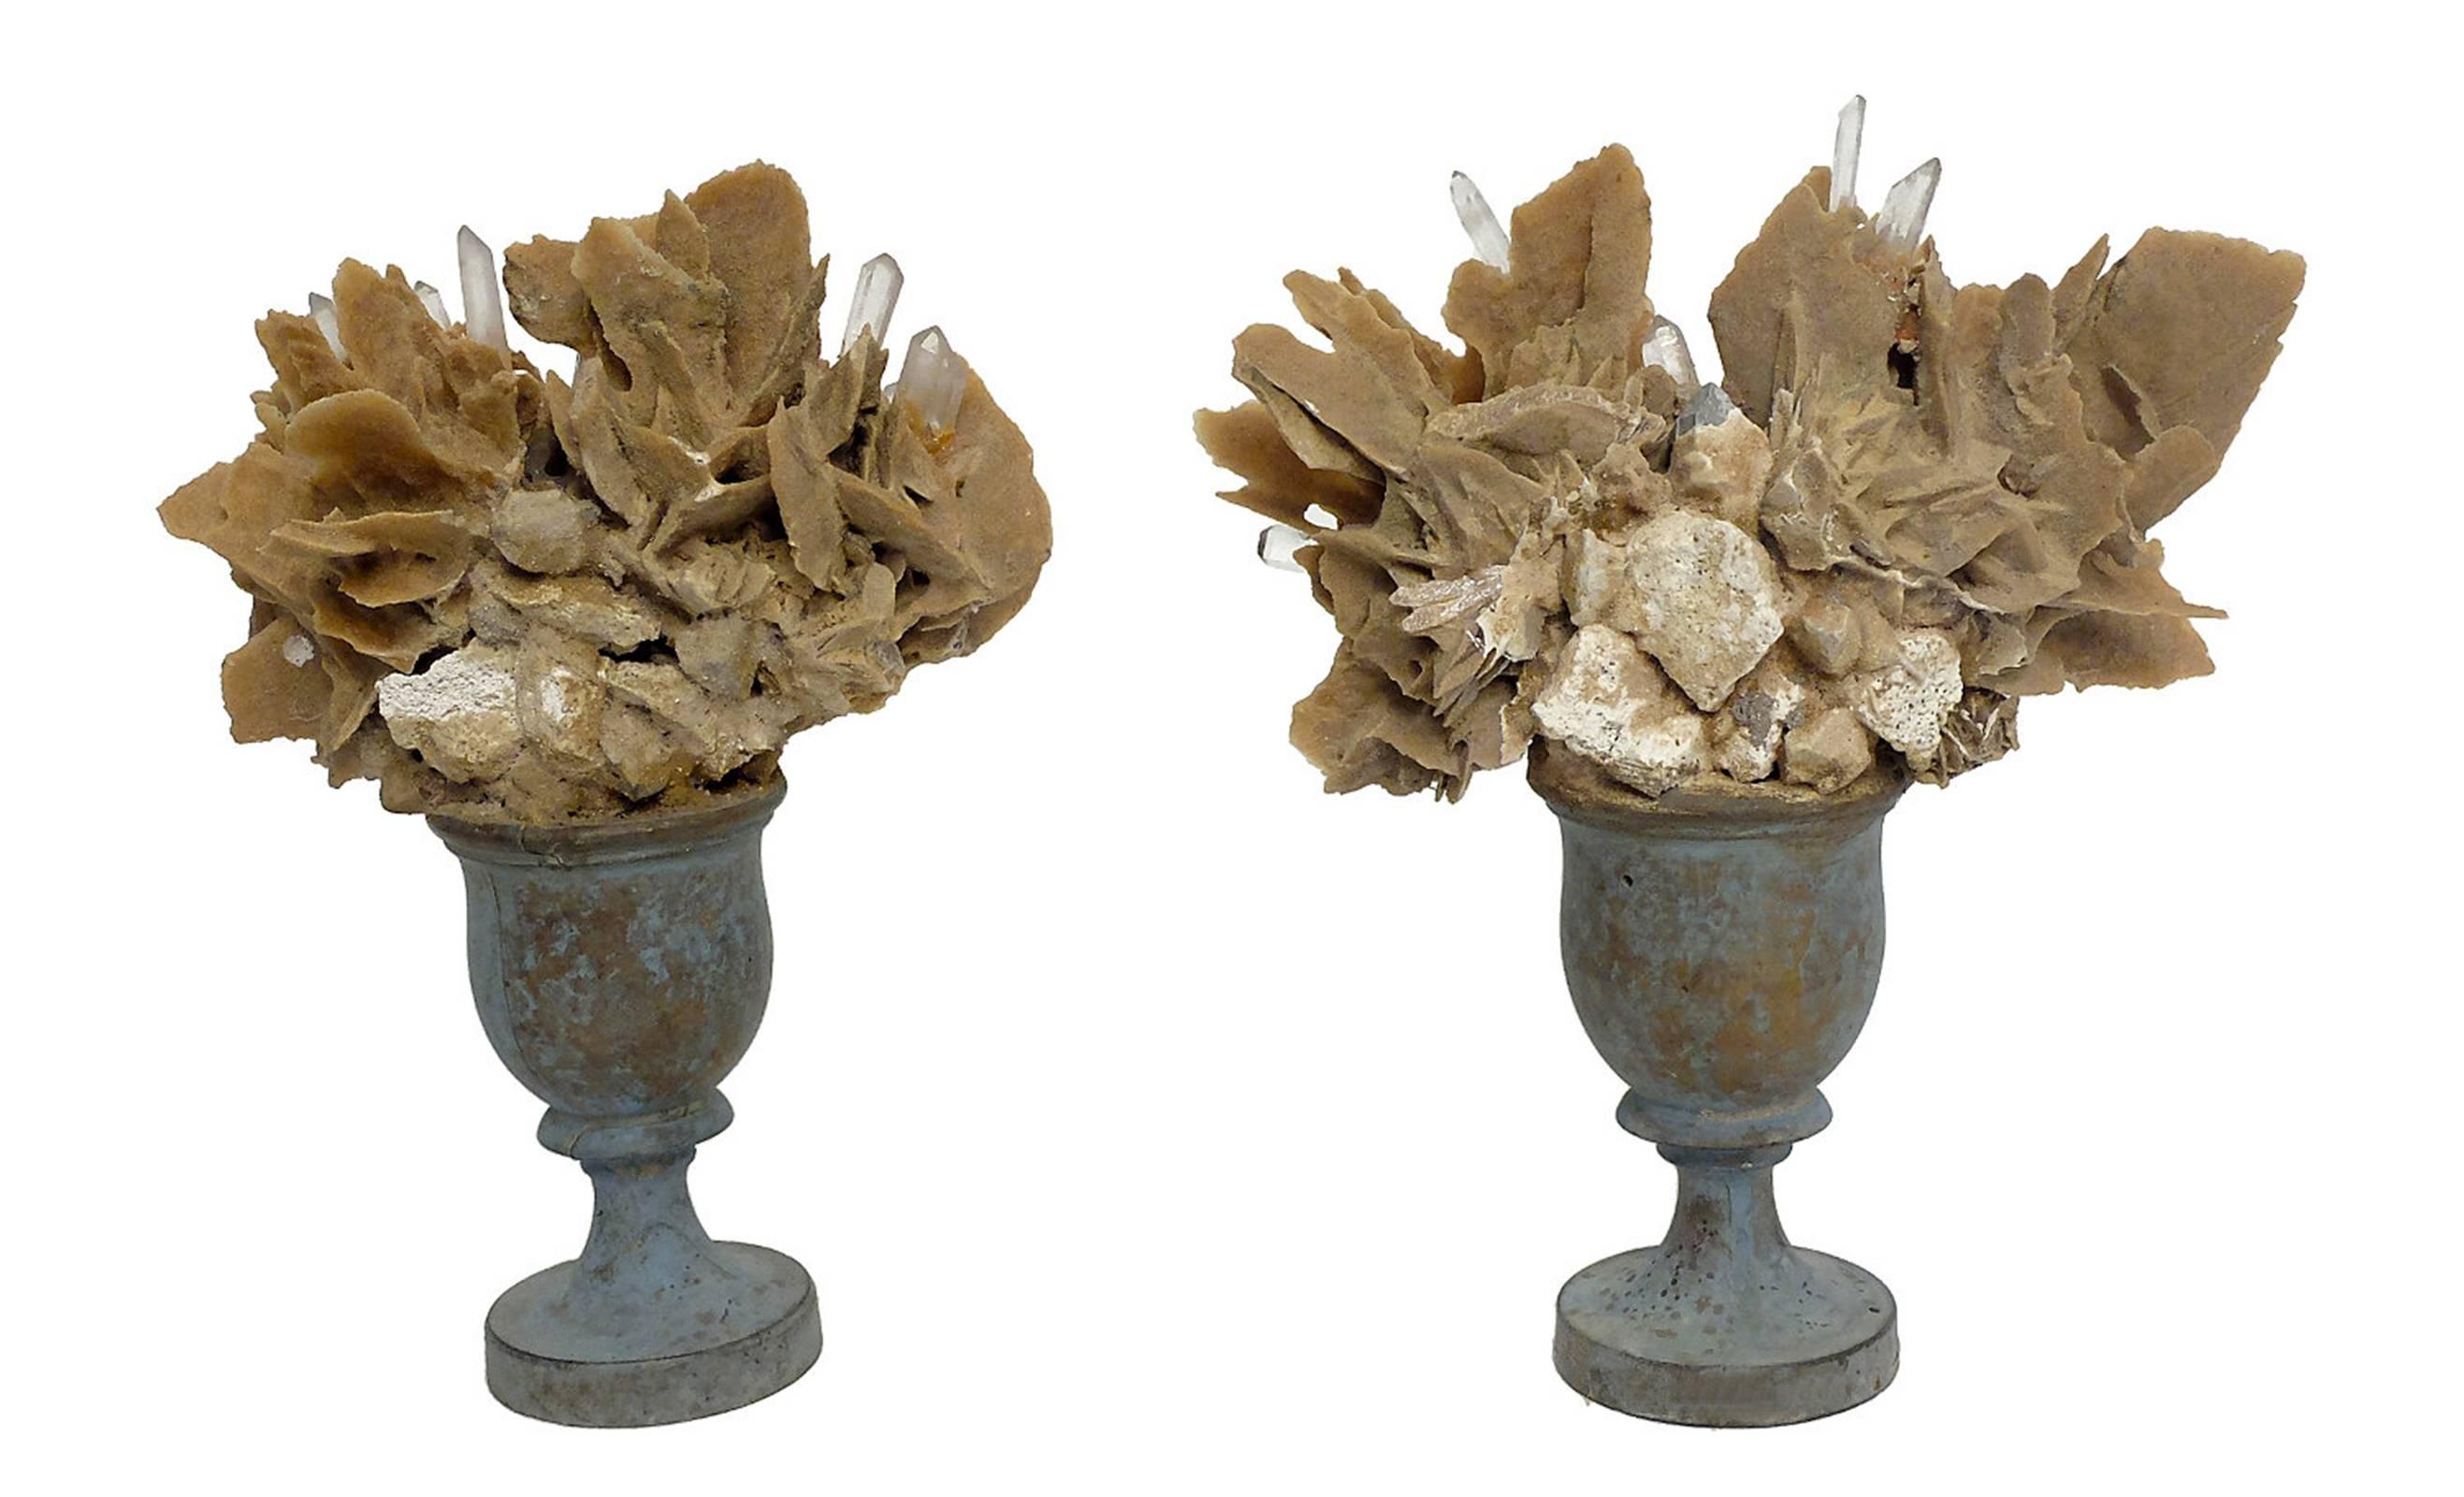 Late 19th Century Wunderkammer Naturalia Mineral Specimen, a Pair of Desert Rose and Rock Crystal